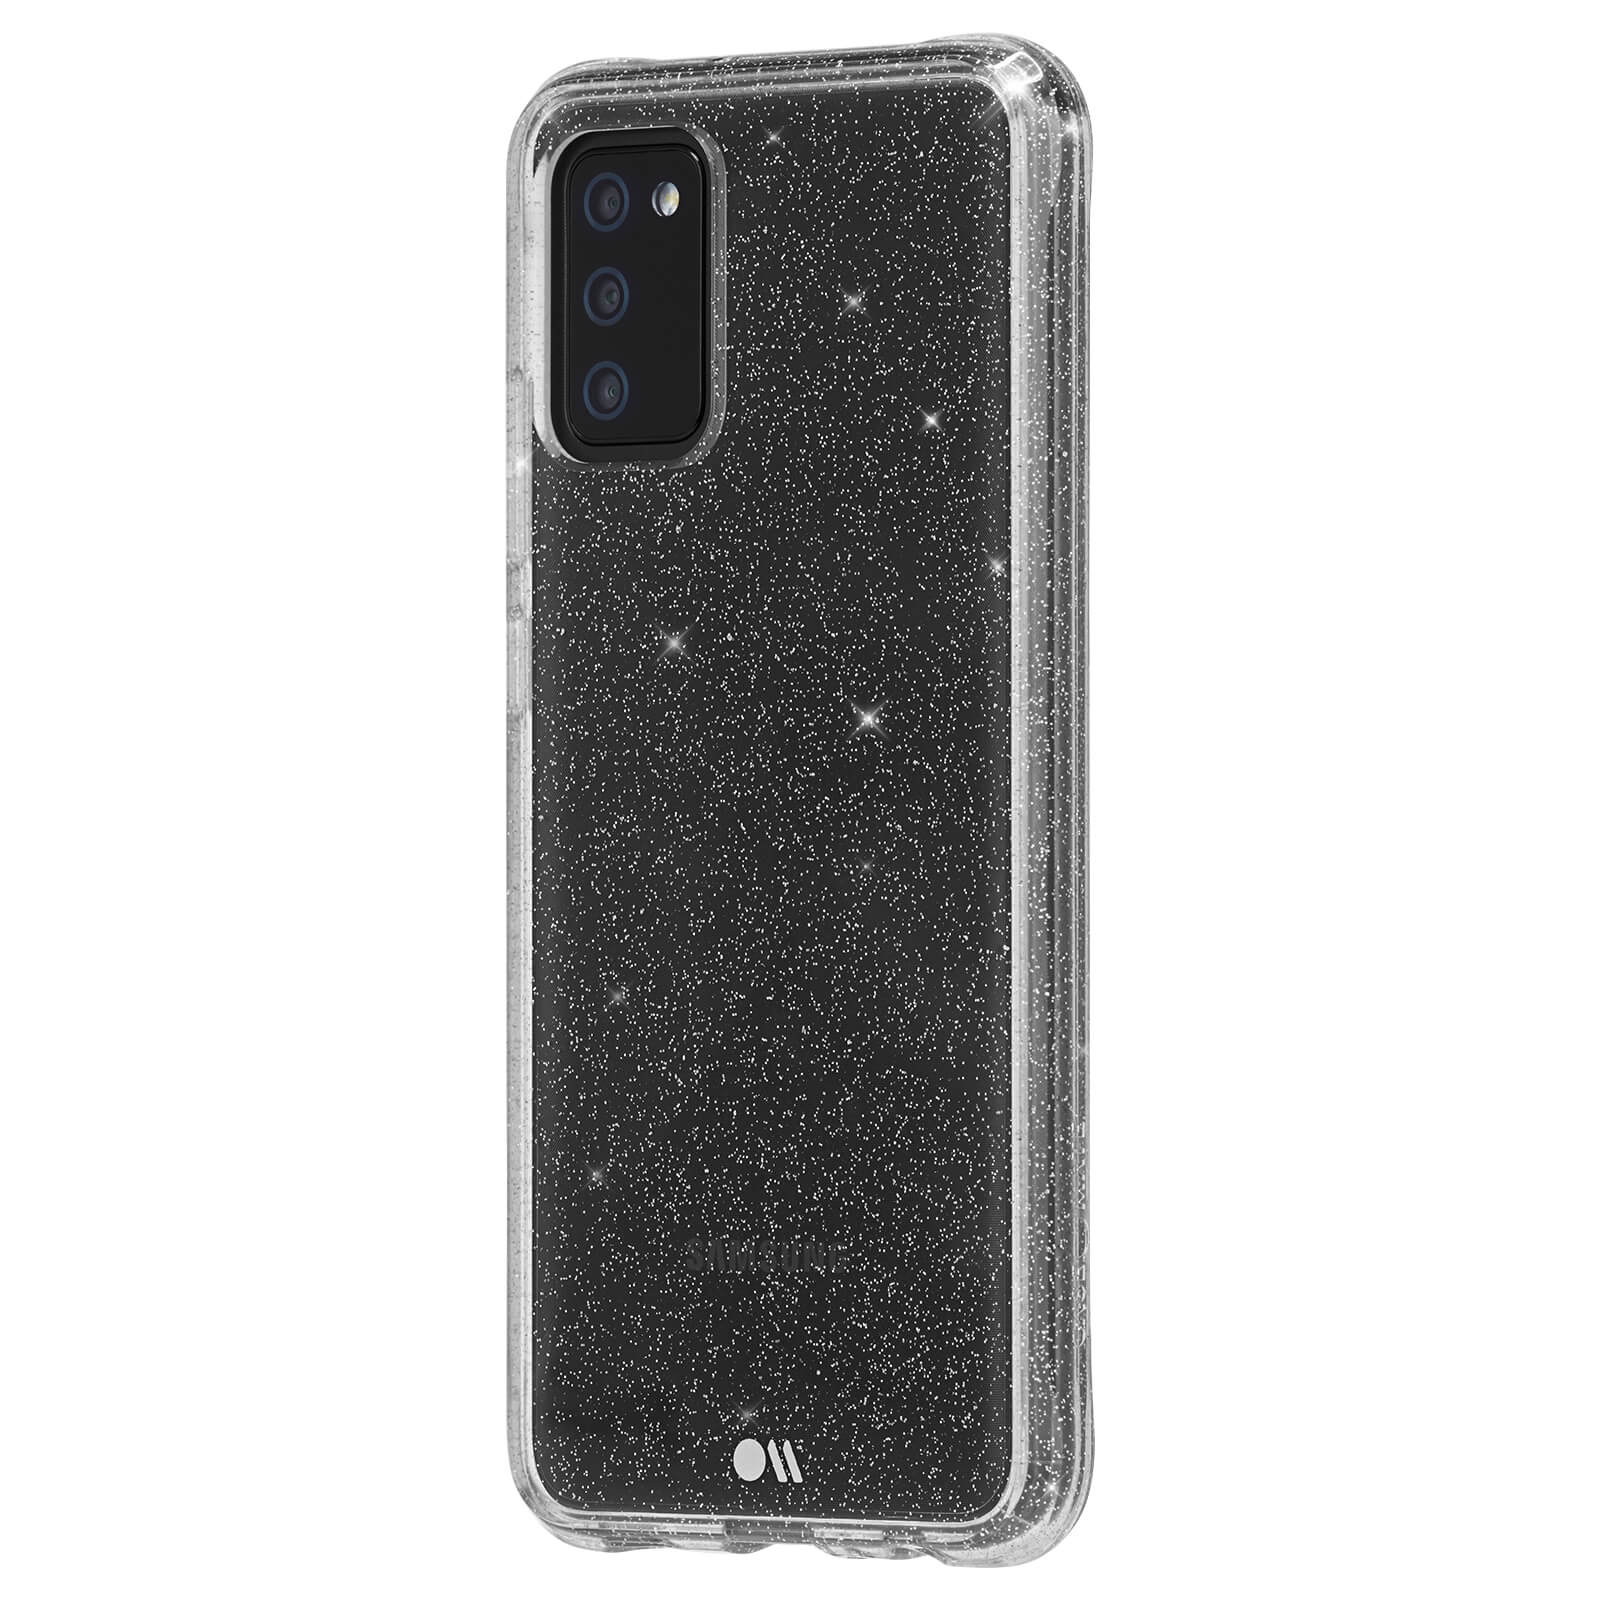 Protective fashion case for Galaxy A02s. color::Clear